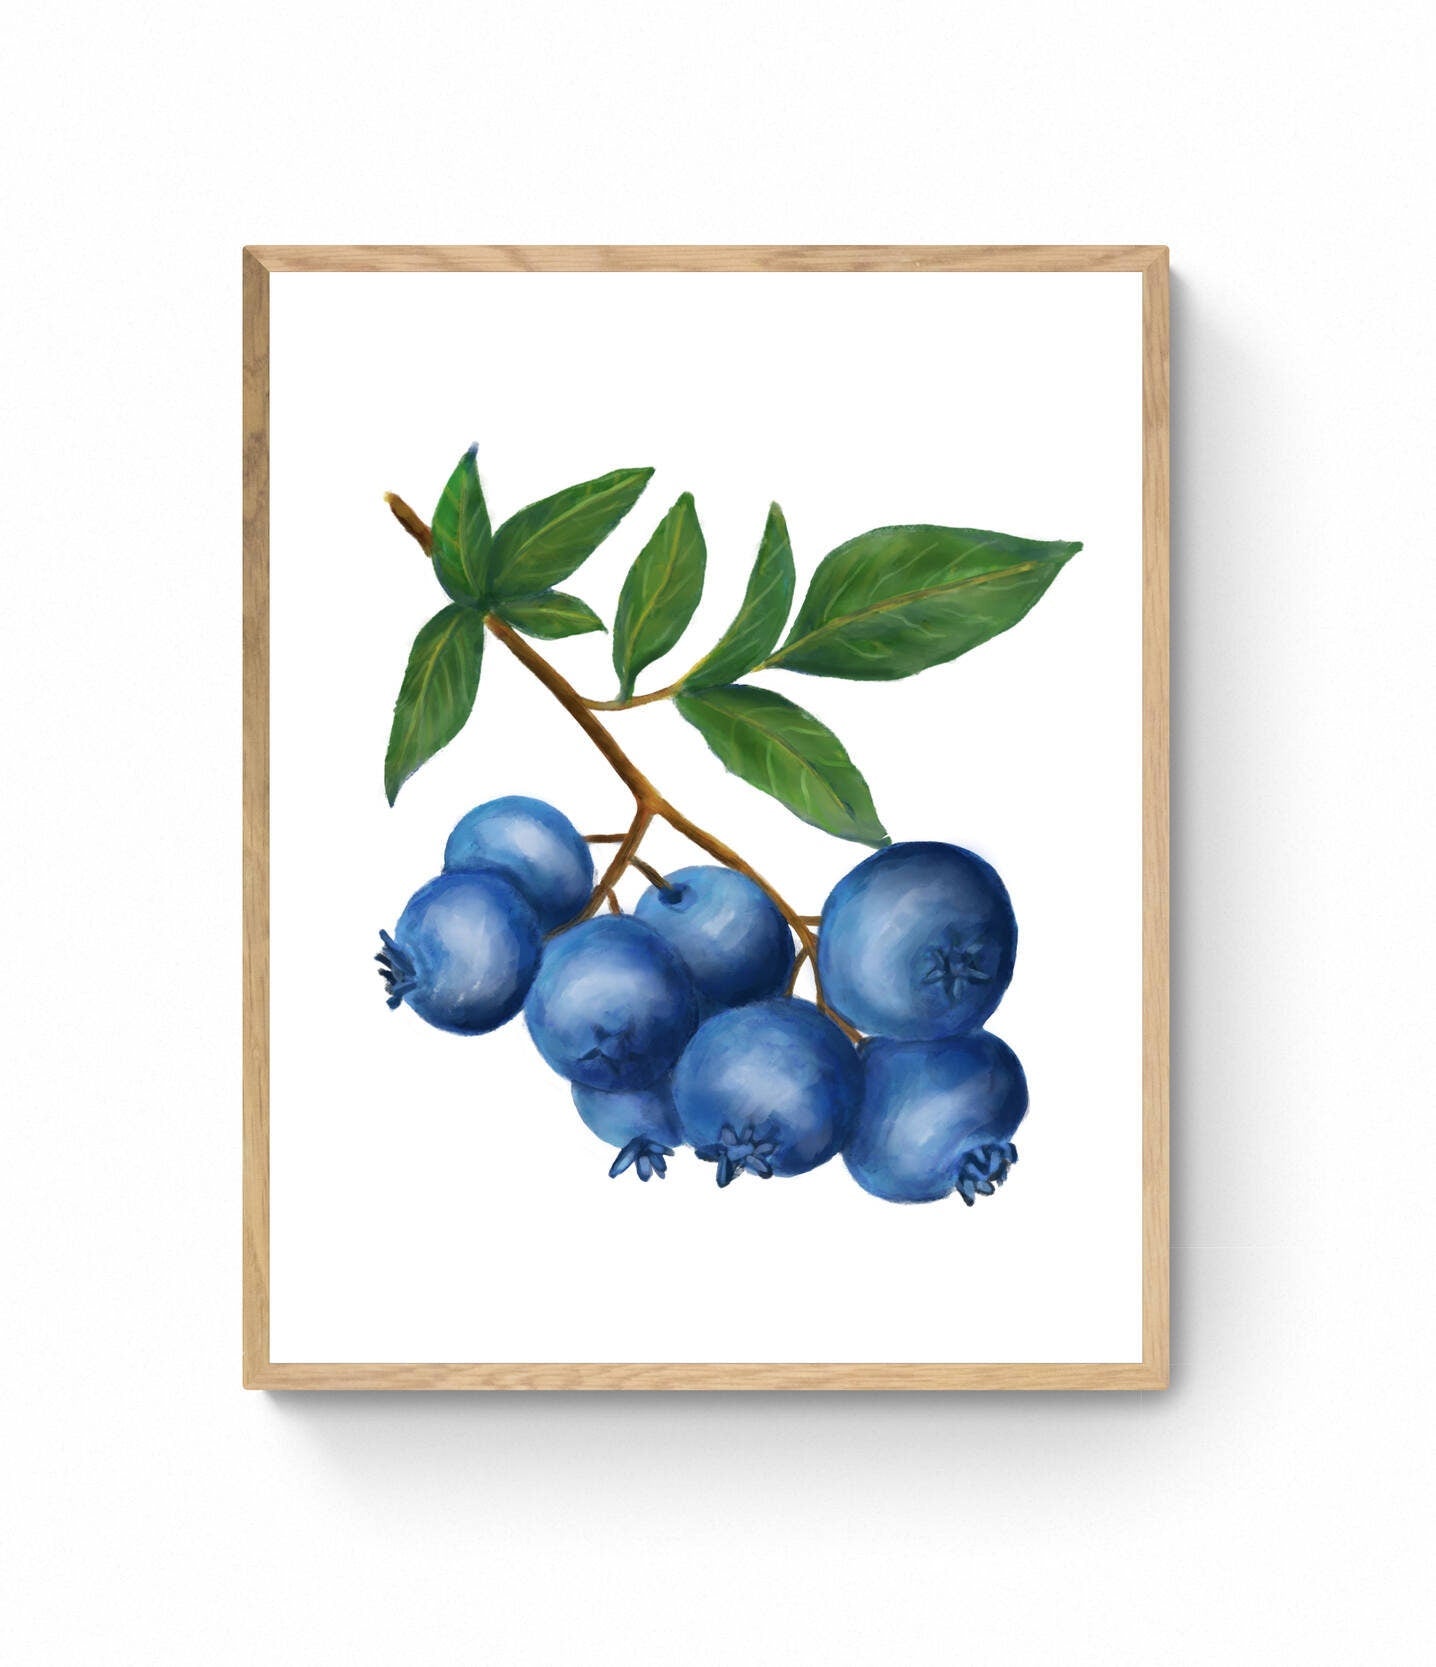 Blueberry Art Print, Blueberry Wall Art, Kitchen Wall Hanging, Dining Room Decor, Berry Painting, Fruit Illustration, Farmhouse Wall Decor